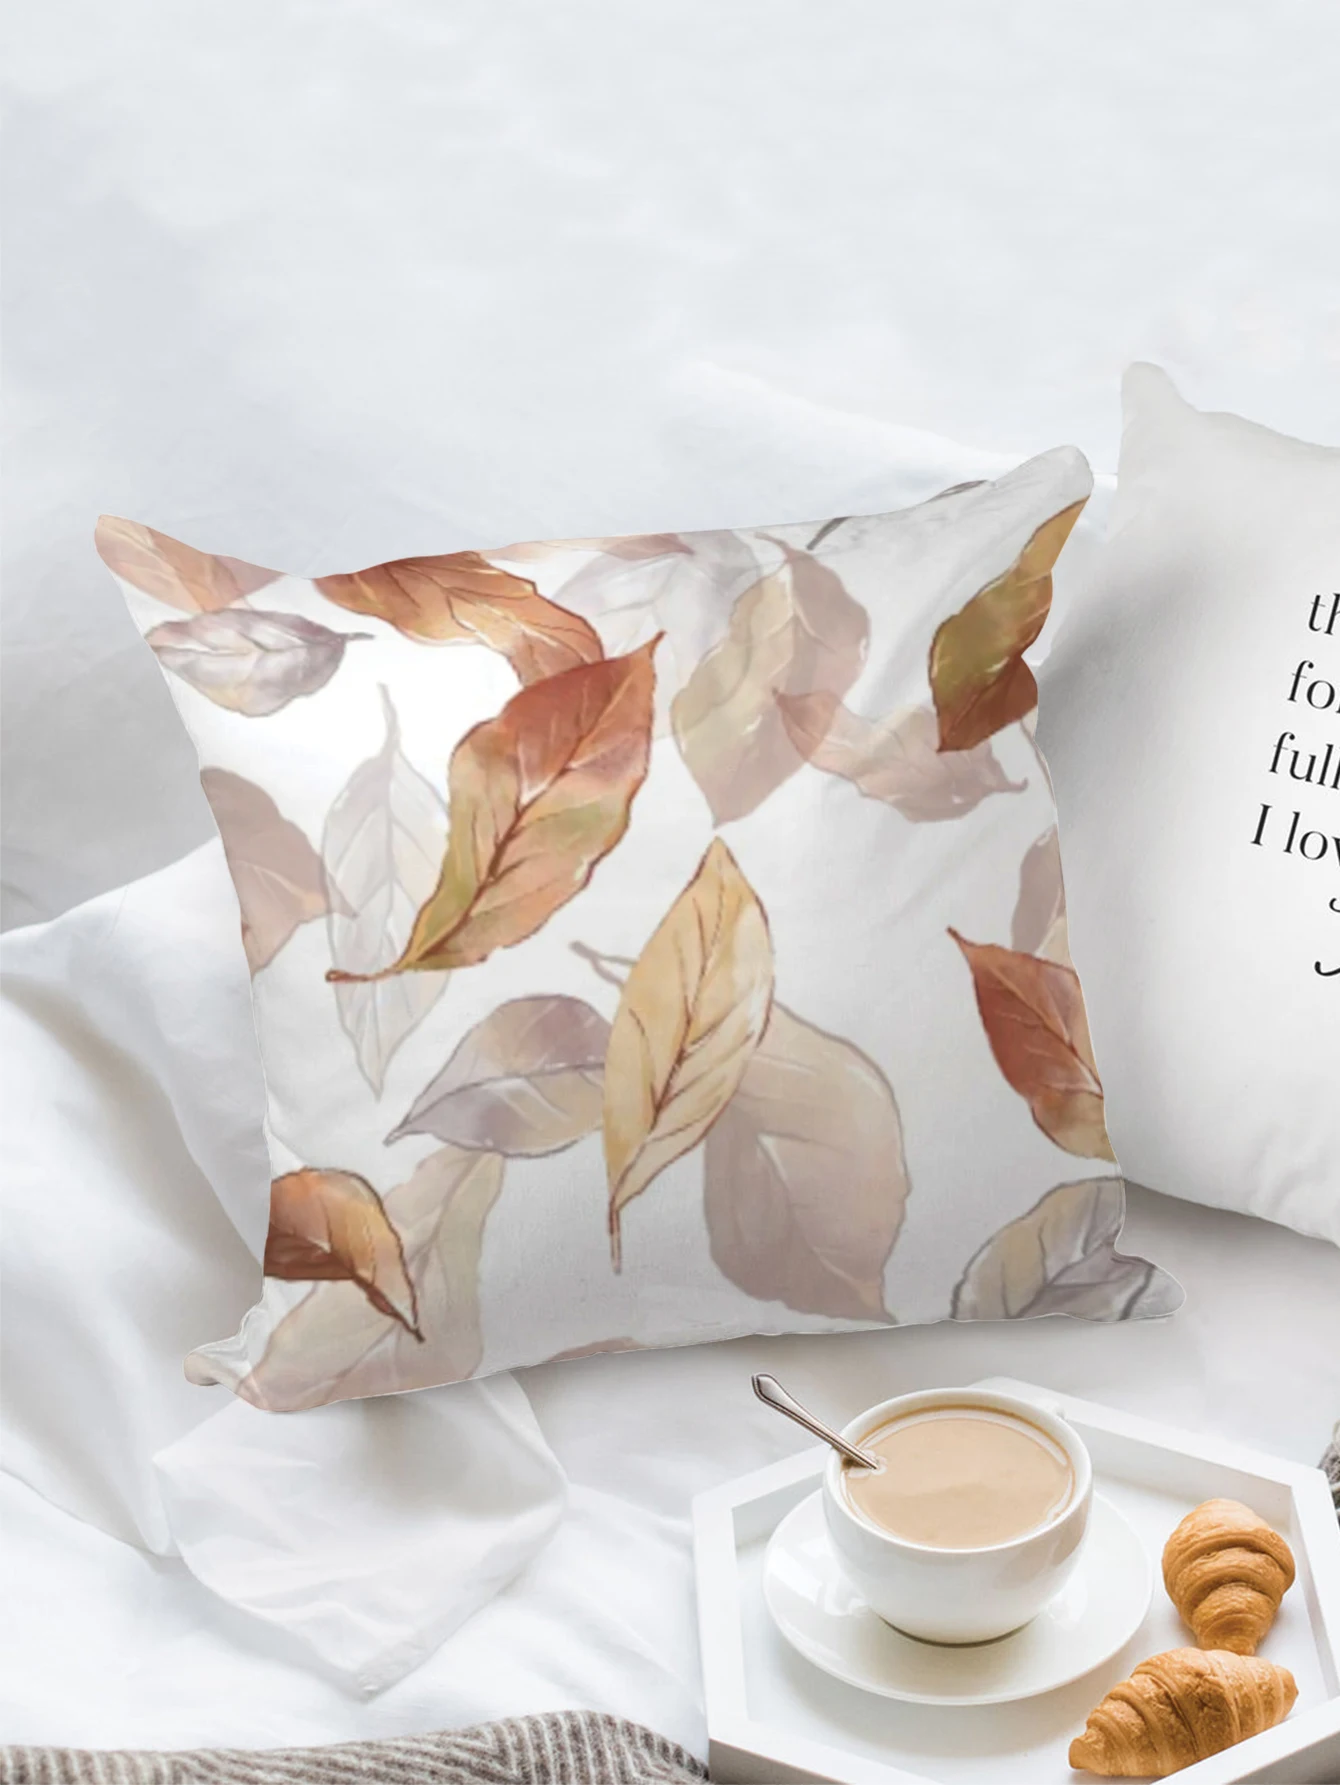 Decorative Leaf Pillowcase Polyester Square Cushion Cover Throw Pillows Bed Couch Home Decor Dakimakura 45x45cm